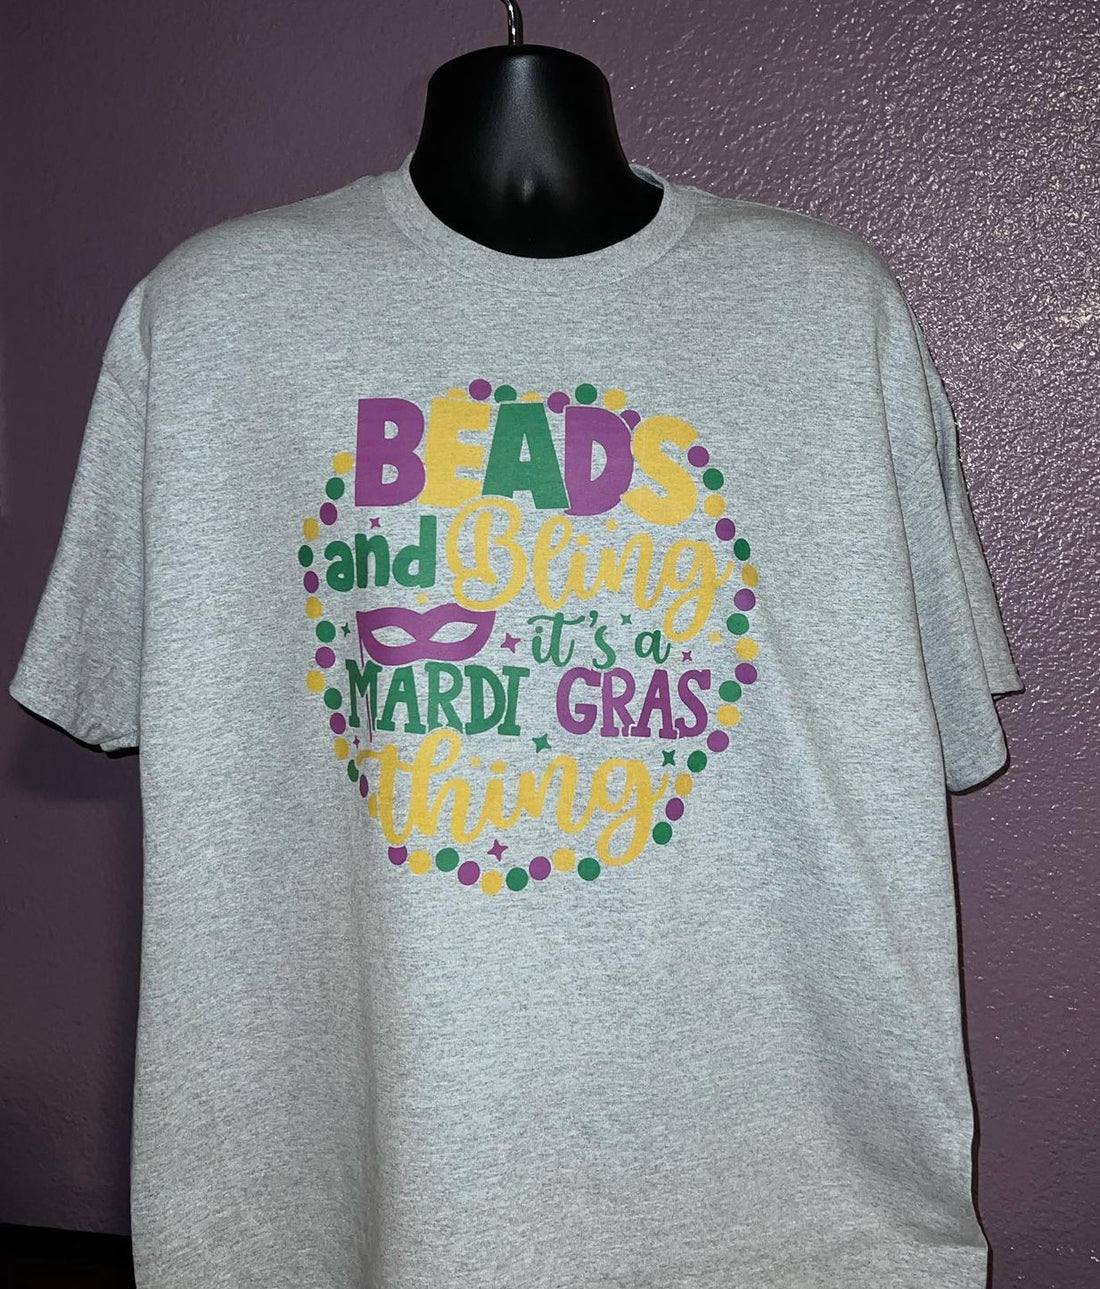 T-Shirt with Beads and Bling It’s Mardi Gras